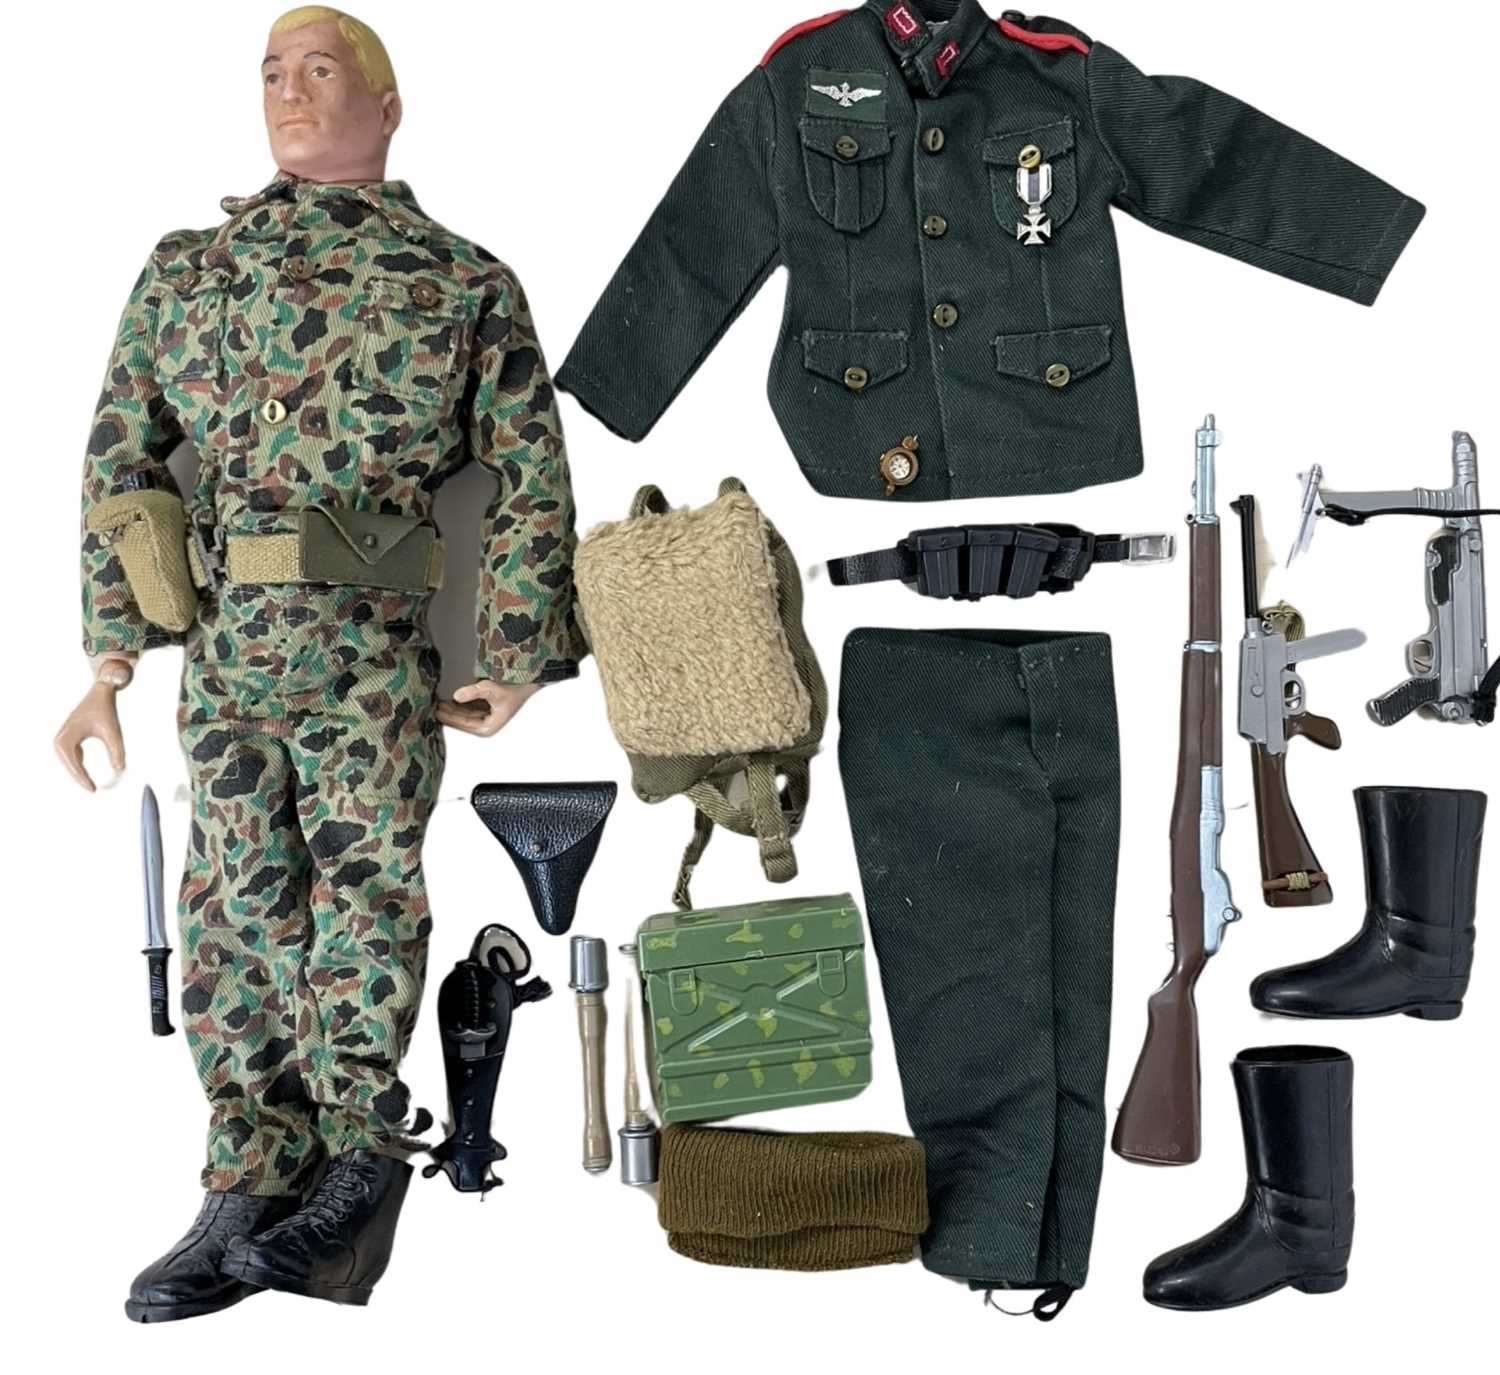 A 1964 Palitoy Action Man figure, together with an extra outfit and accessories.